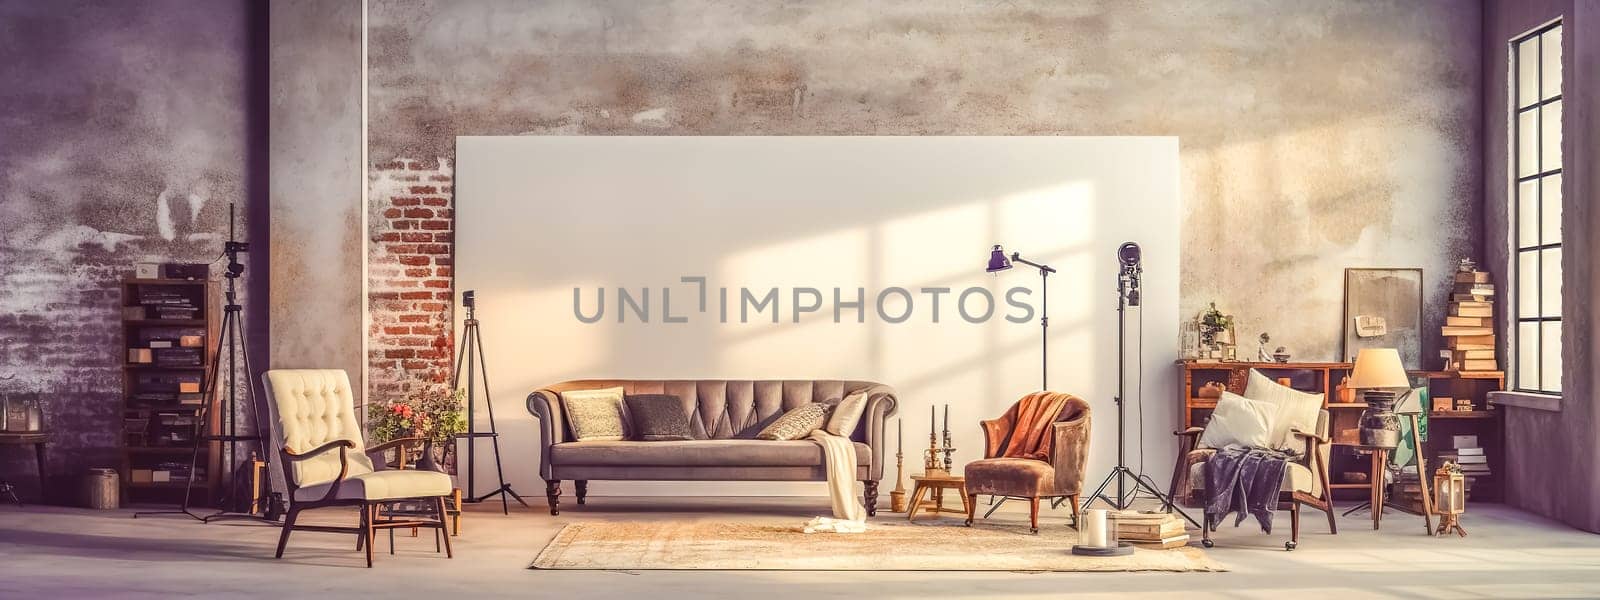 attractive interior with furniture, photo video studio for creative makers, banner by Edophoto